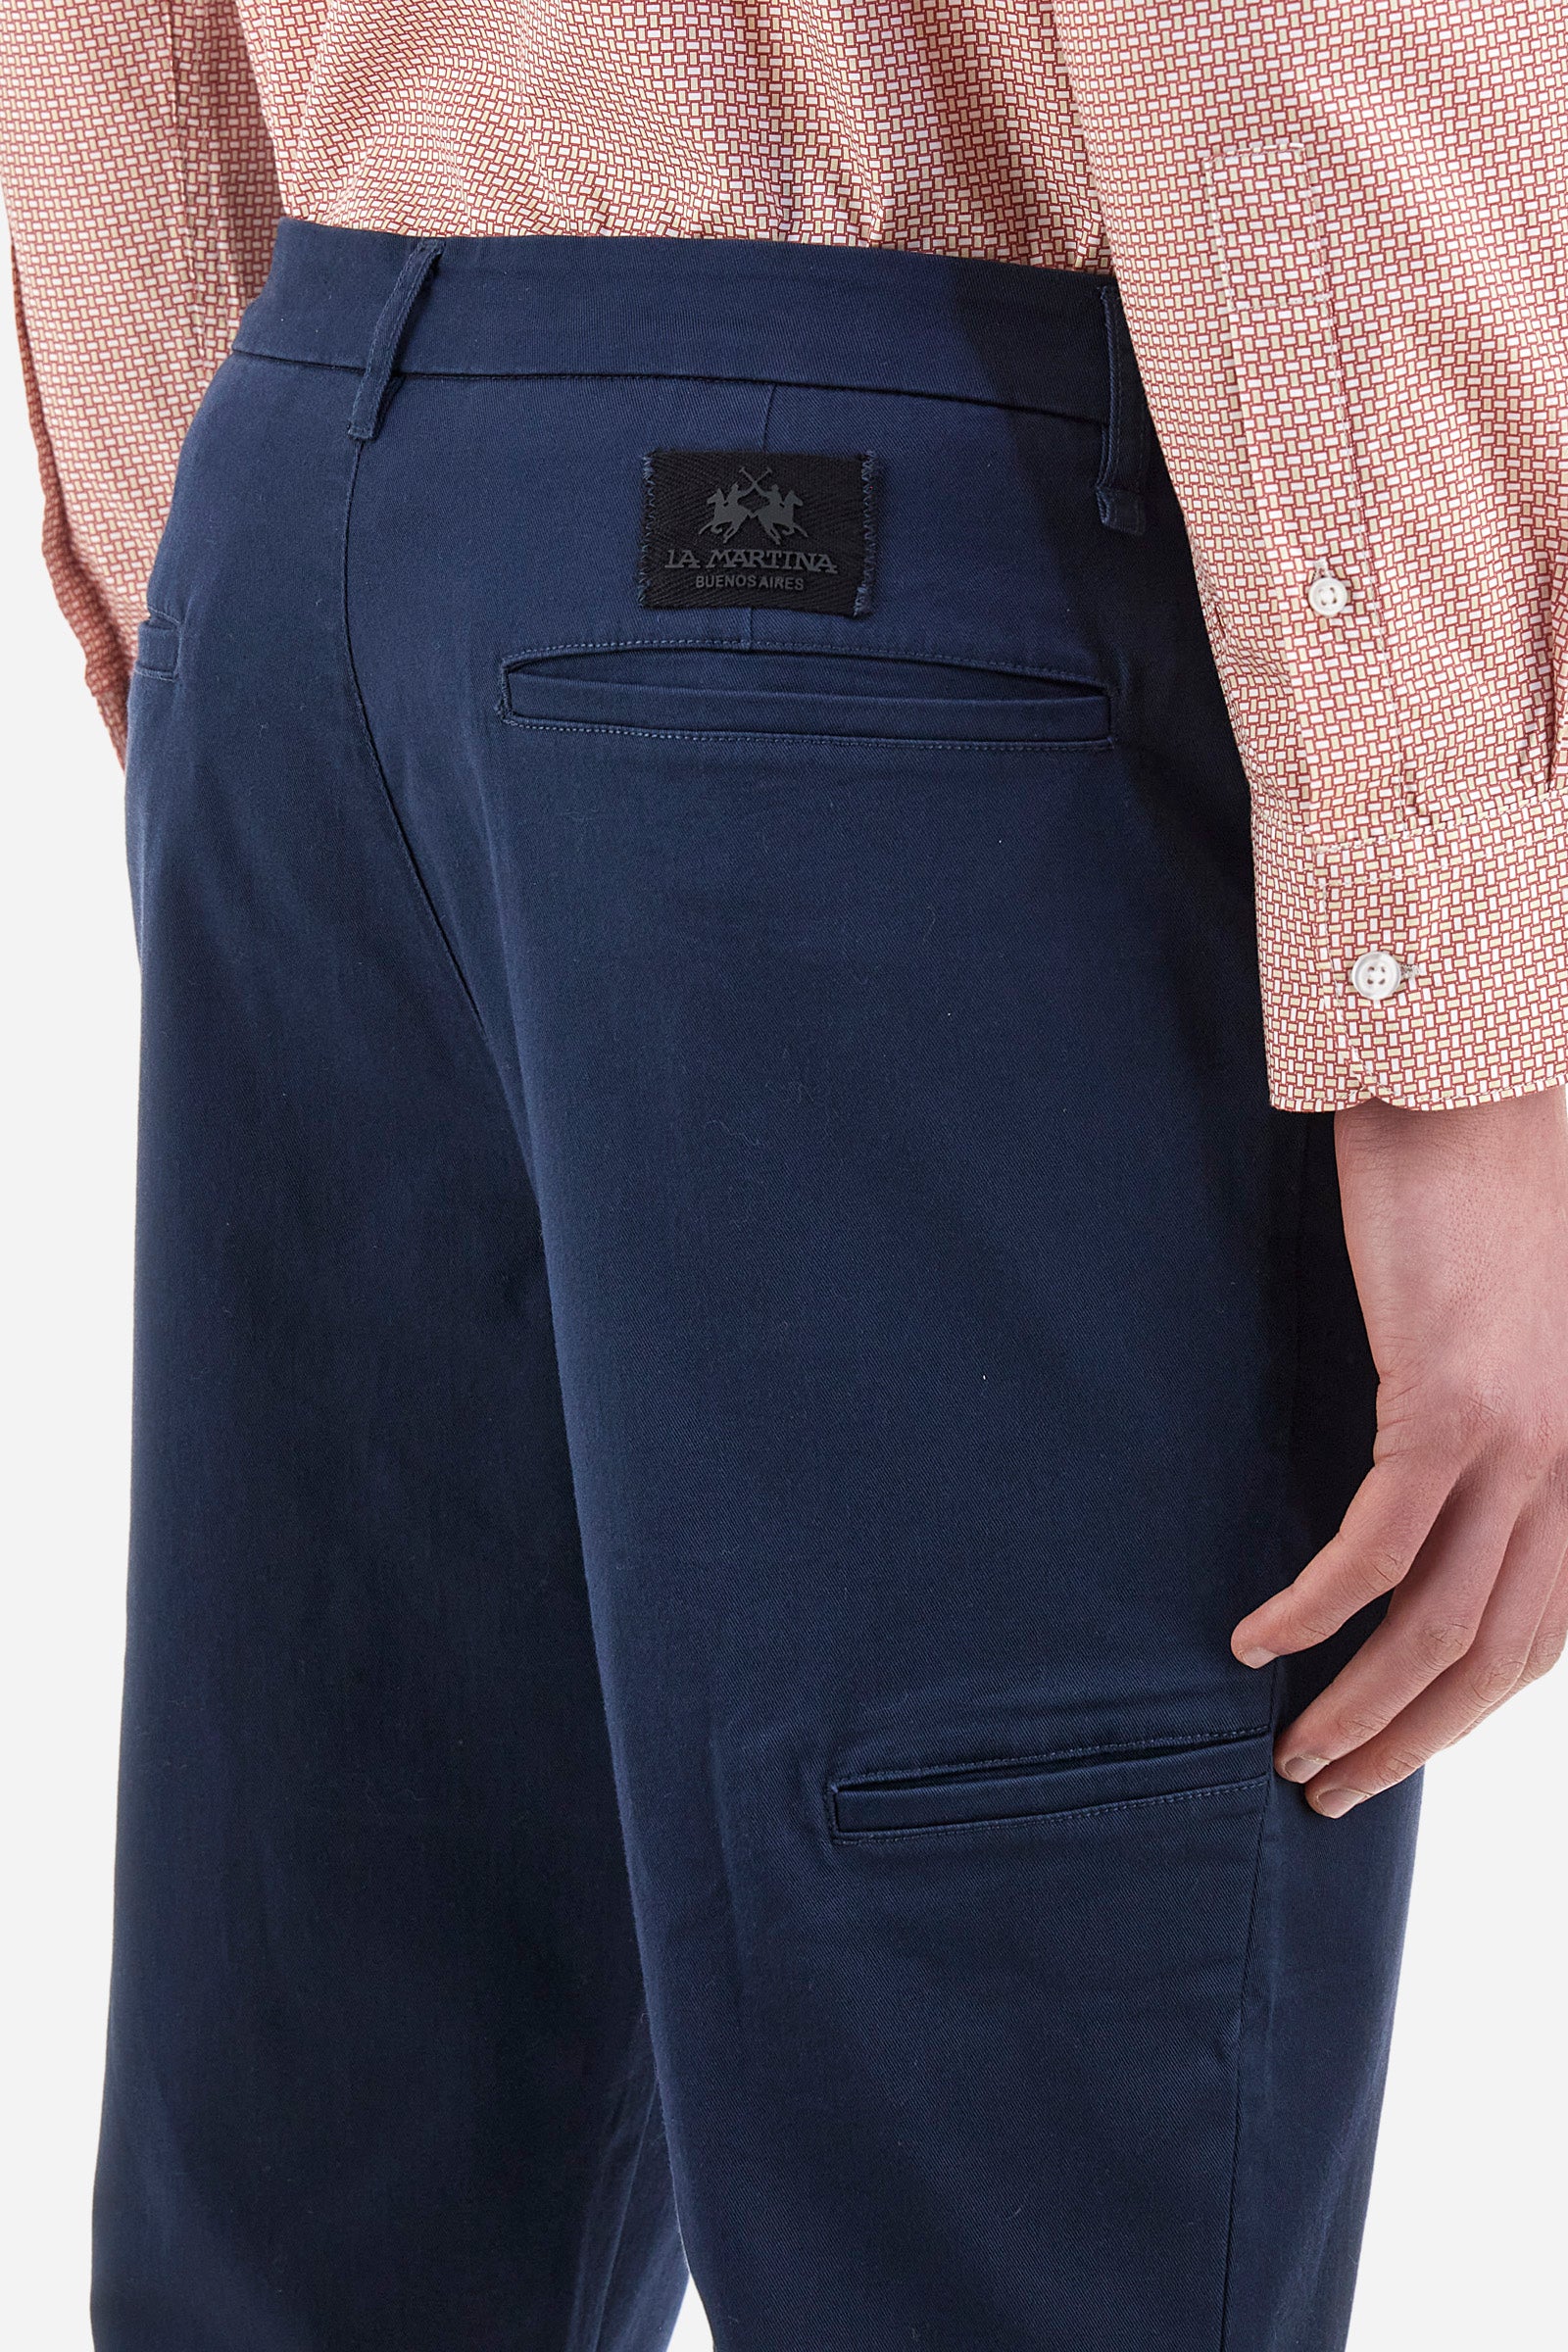 Men's chinos with a regular fit - Yirmeyahu